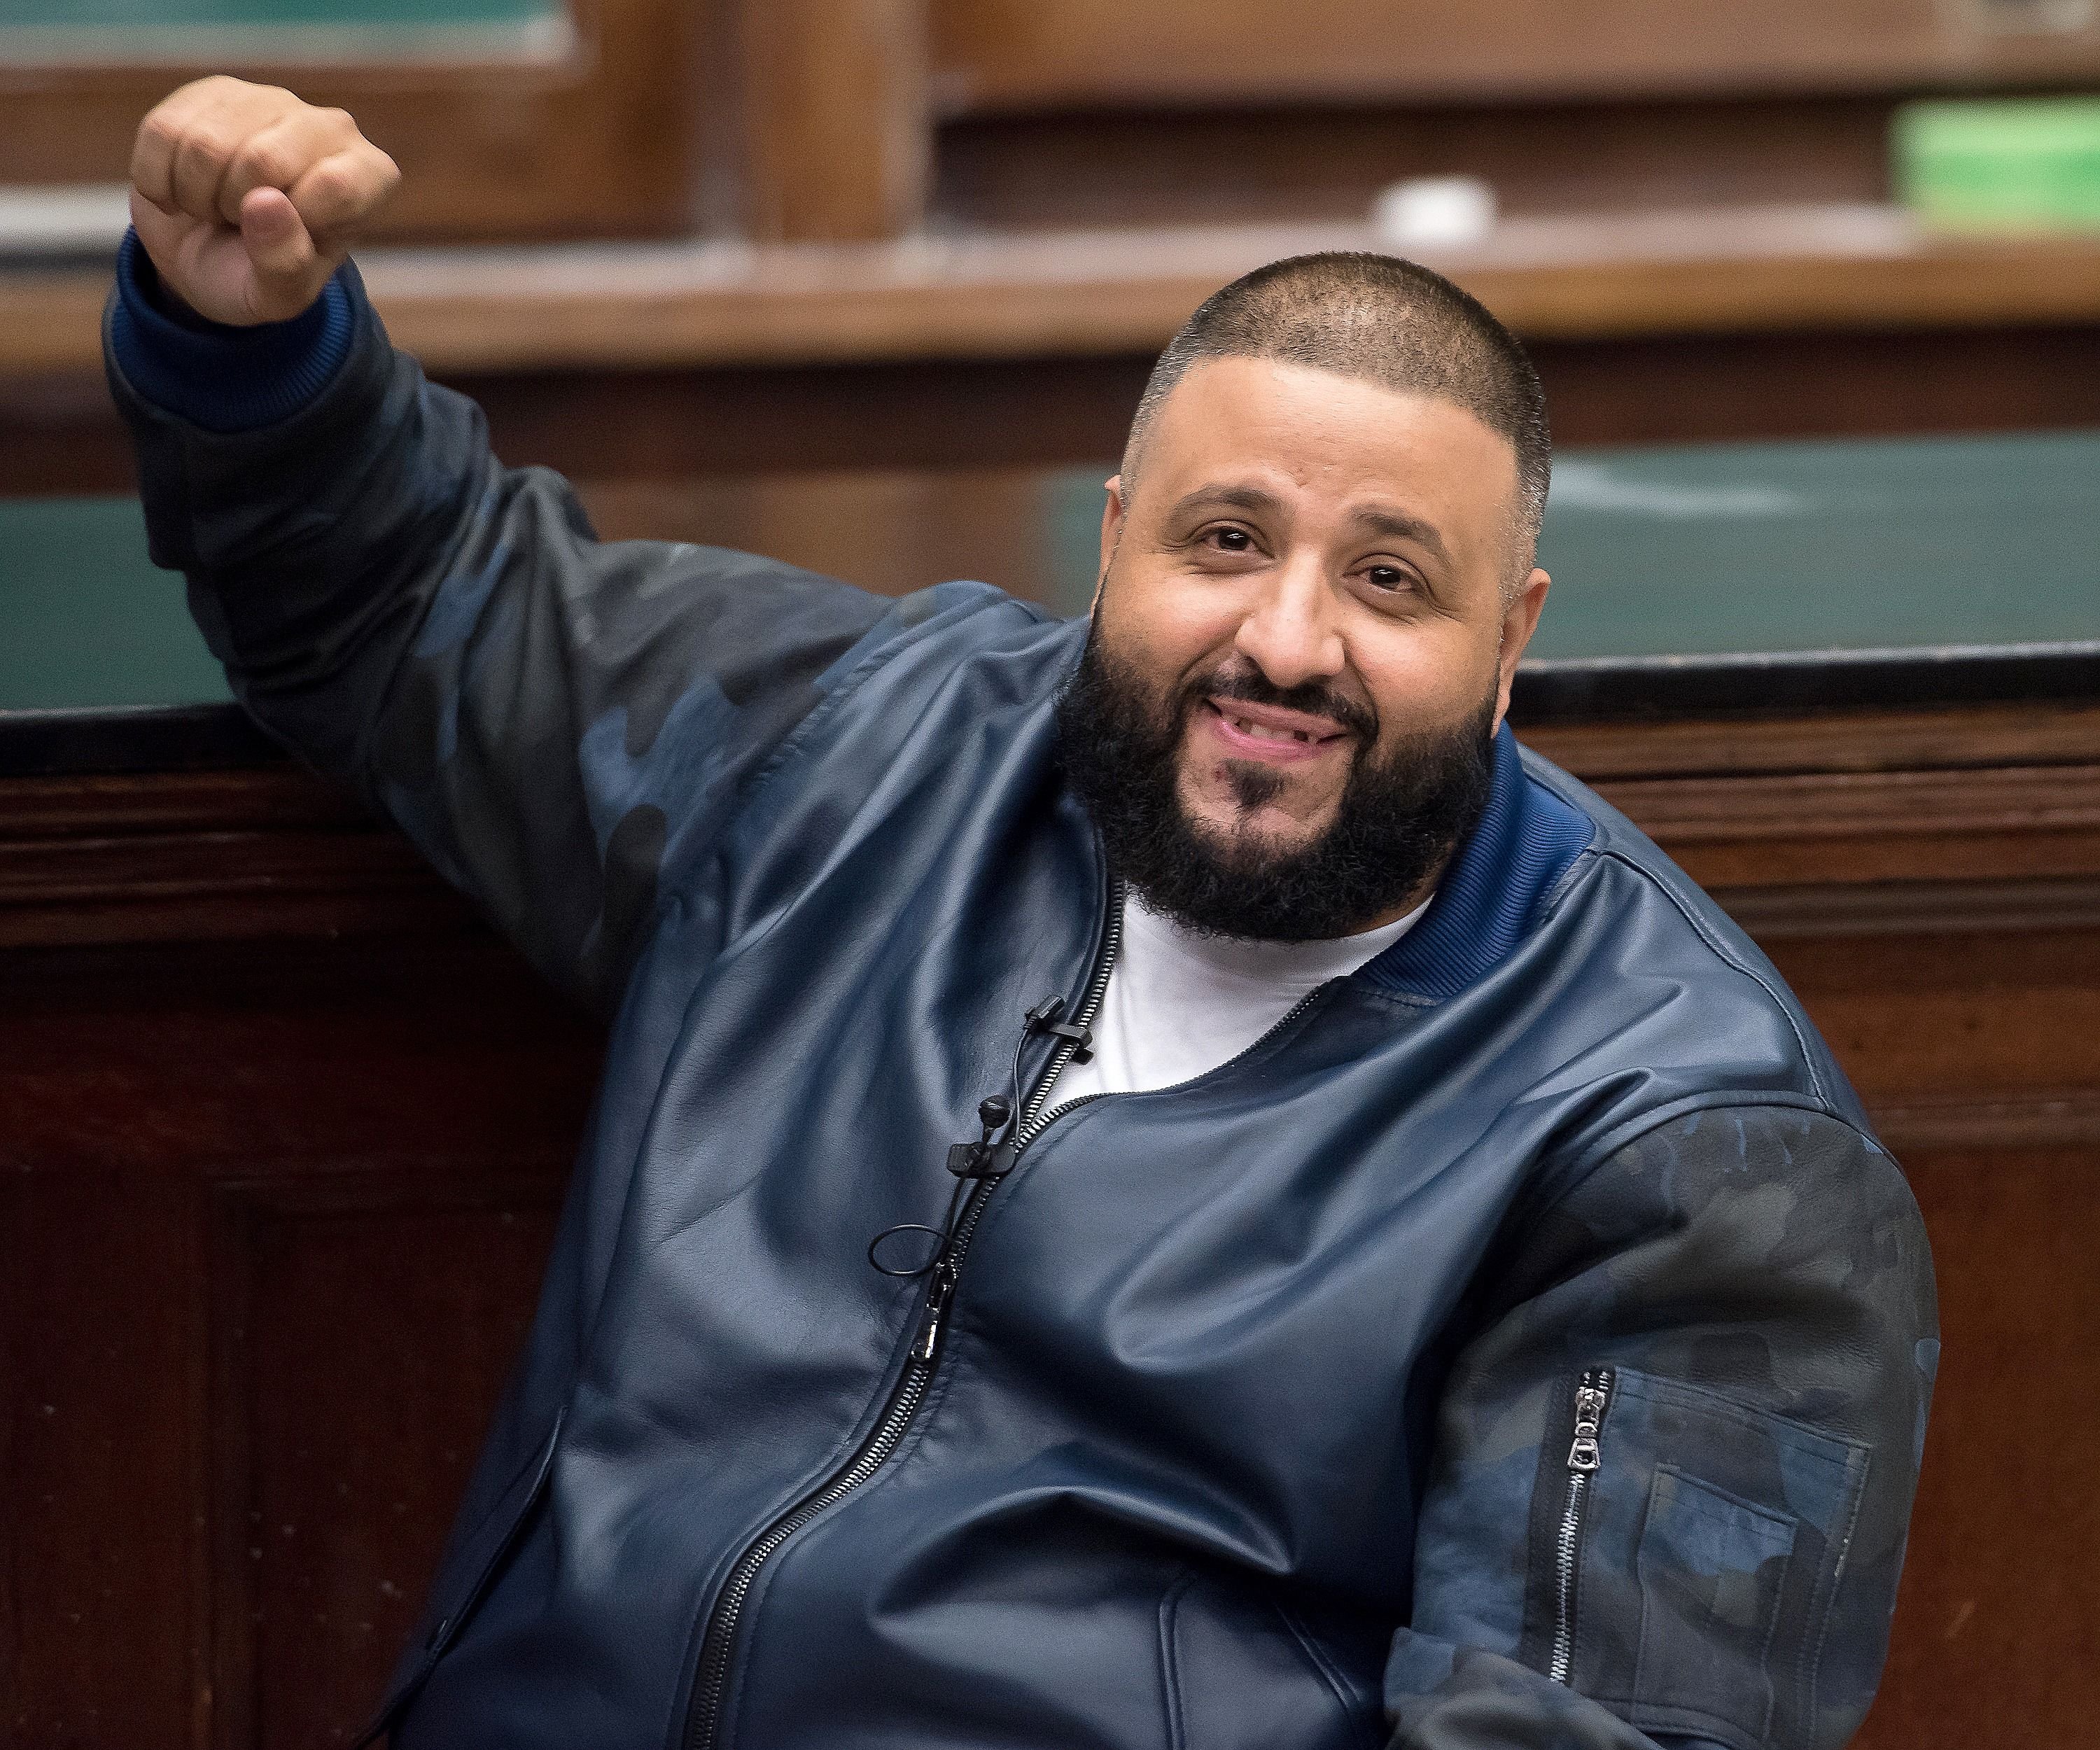 DJ Khaled attends DJ Khaled Presents: Keys To Success A Conversation With Arianna Huffington at Columbia University on December 8, 2016 in New York City. | Photo: Getty Images